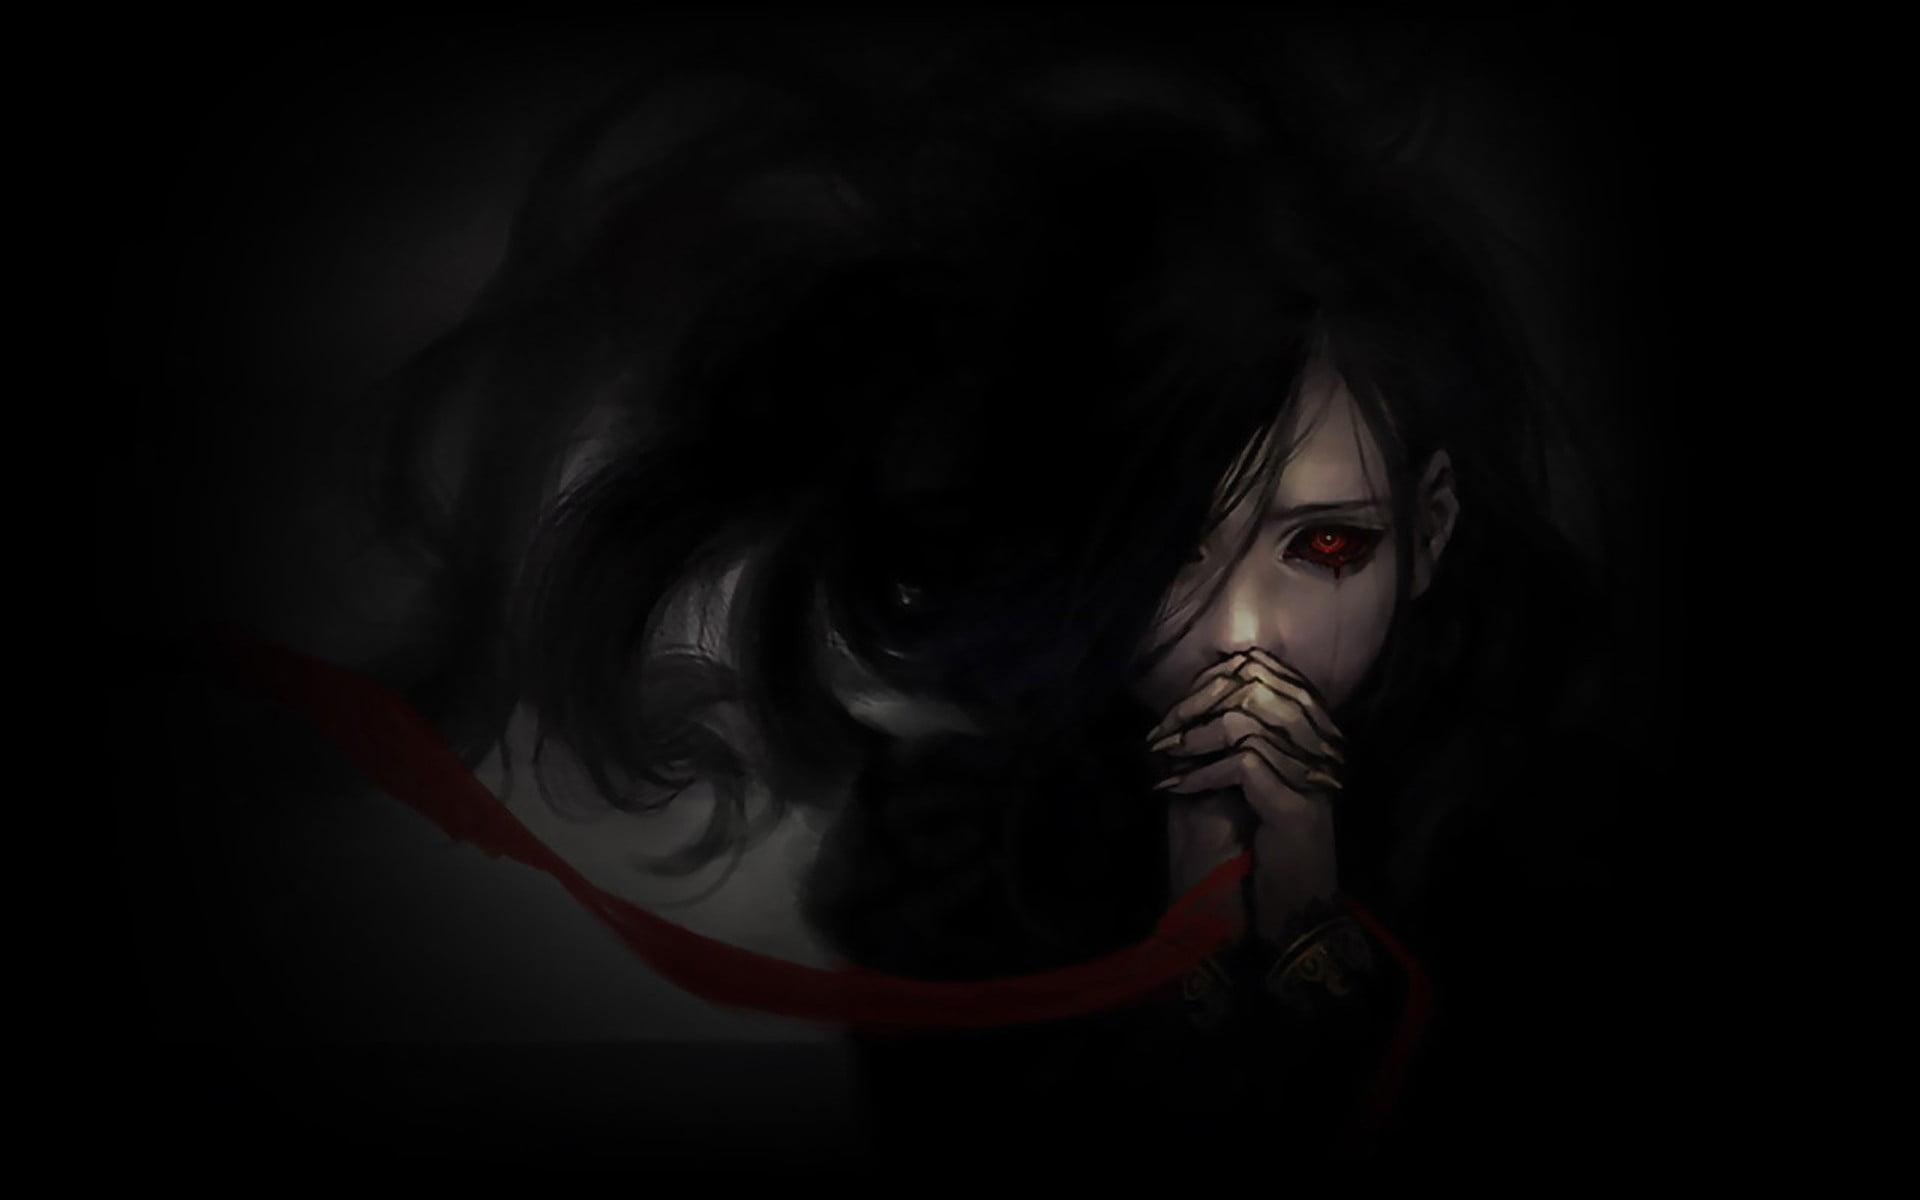 Female animated character wallpaper, horror, blacked out eyes